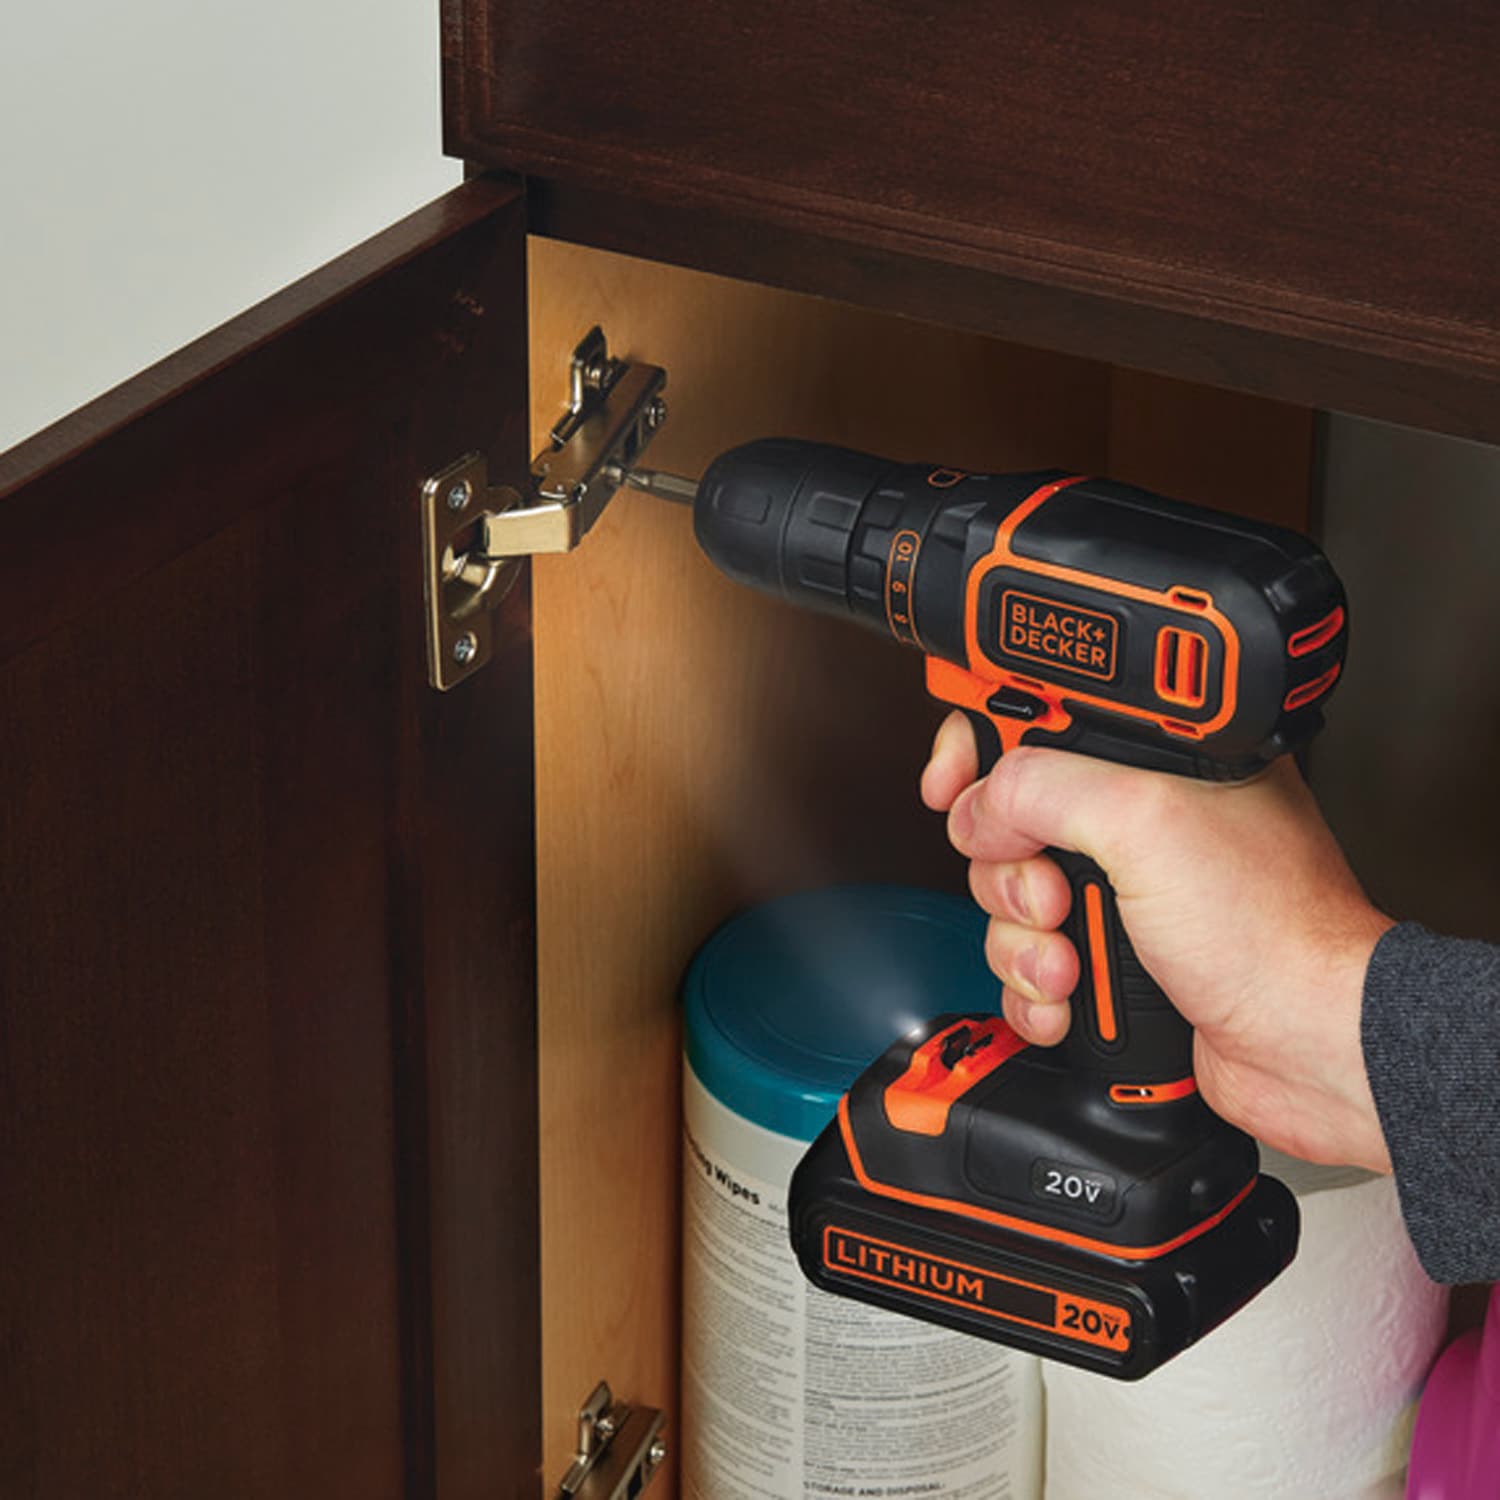 BLACK+DECKER 20-volt Max 3/8-in Cordless Drill (1 Li-ion Battery Included and Charger Included)